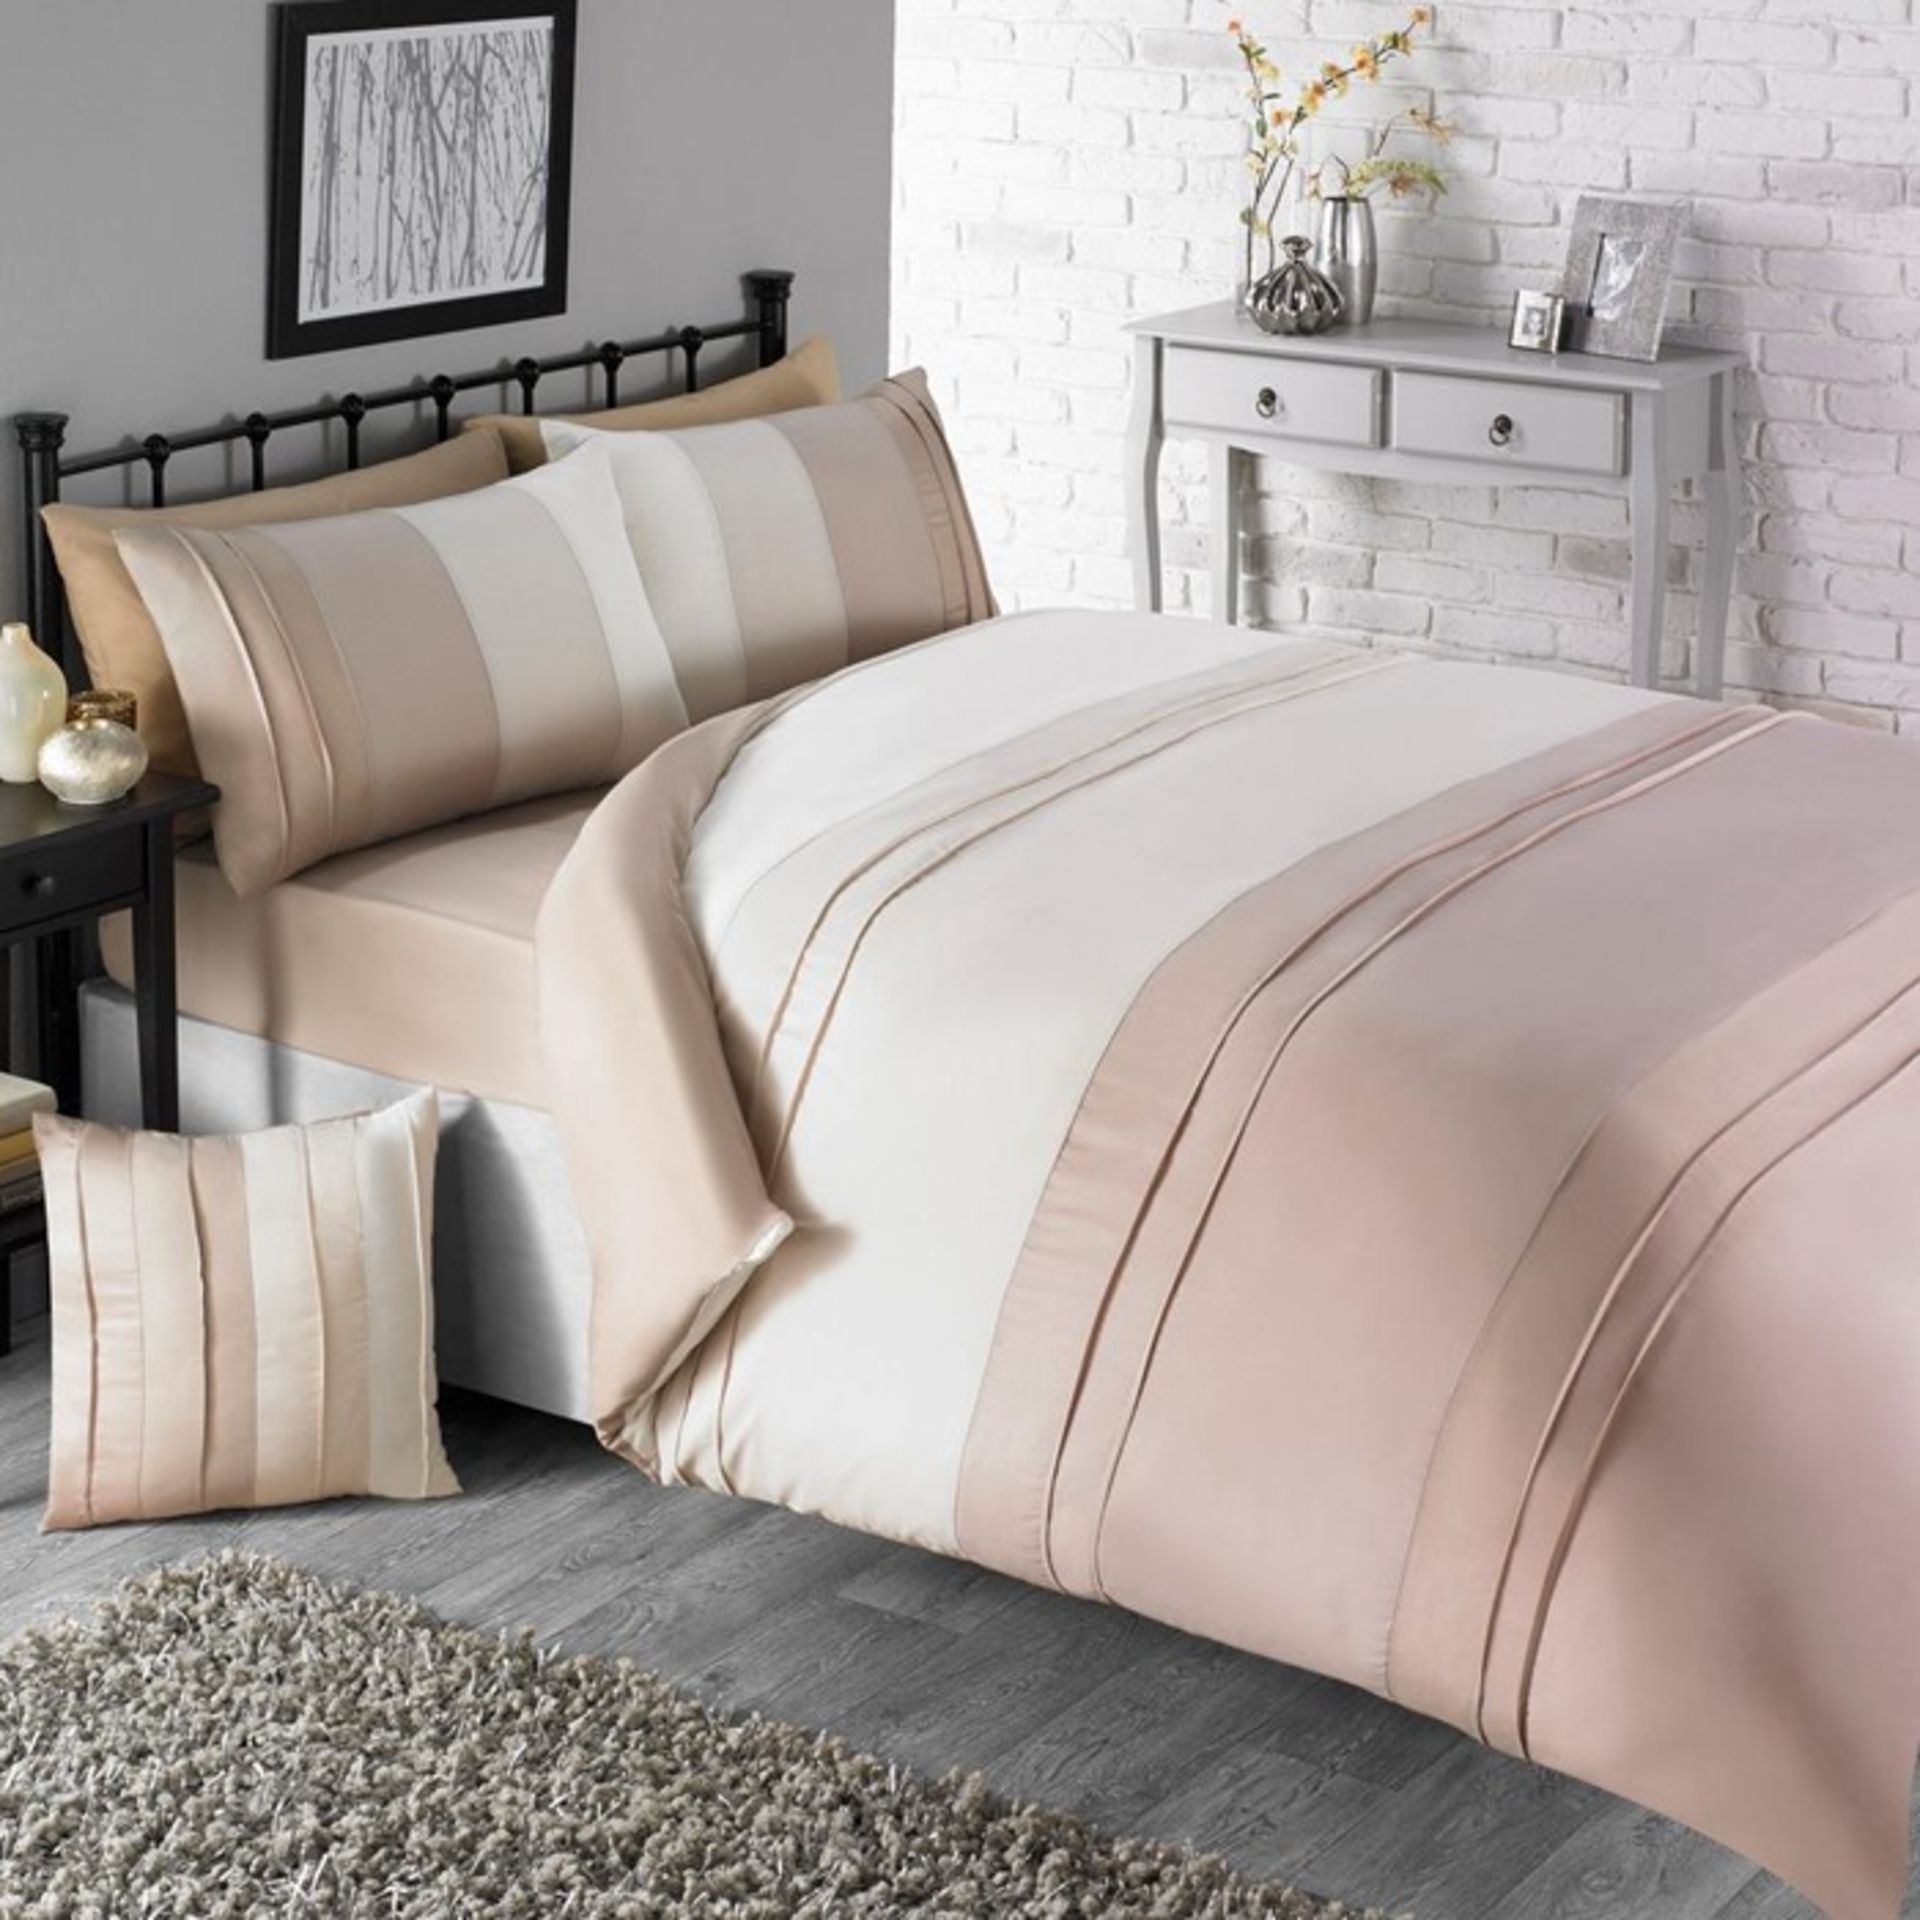 1 AS NEW BAGGED PINTUCK COLOUR PANEL DOUBLE DUVET SET IN NATURAL (VIEWING HIGHLY RECOMMENDED)